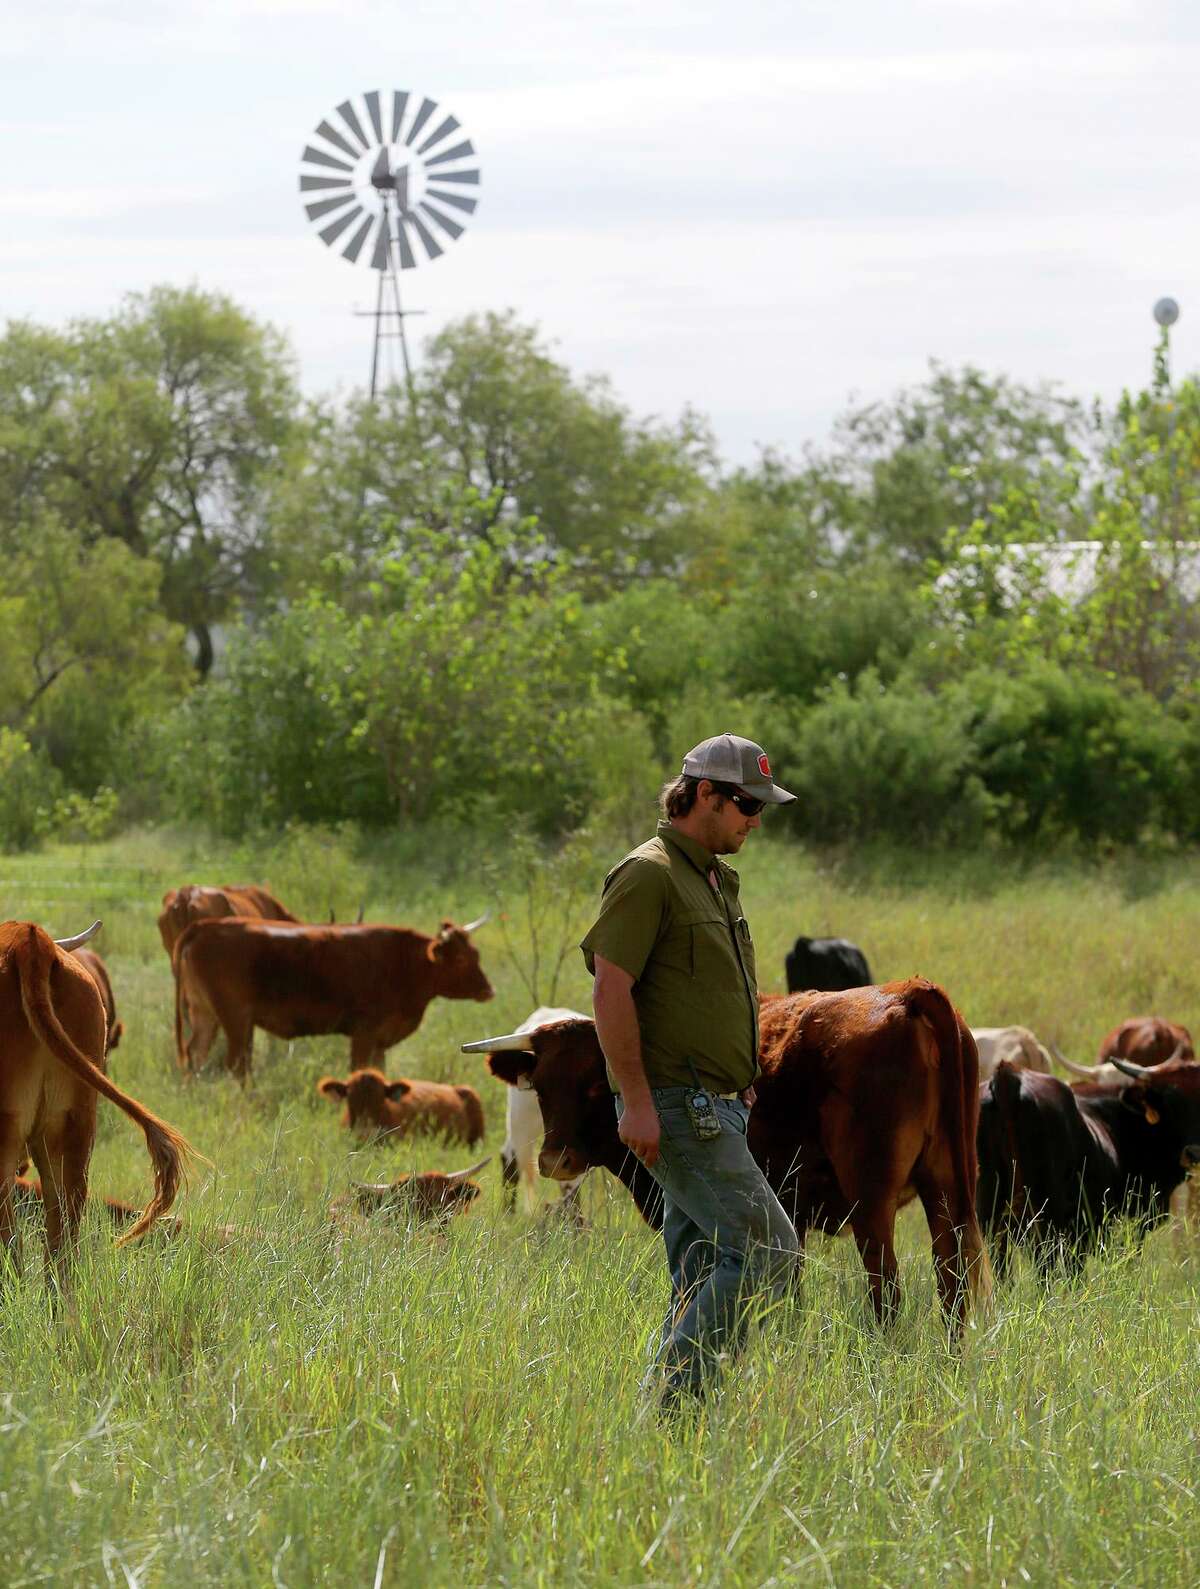 Travis Krause walks past grass fed cattle at the Parker Creek Ranch near D'Hanis. The Krause family specializes in pasture raised chickens for eggs and meat, as well as grass fed beef and pasture raised turkeys.